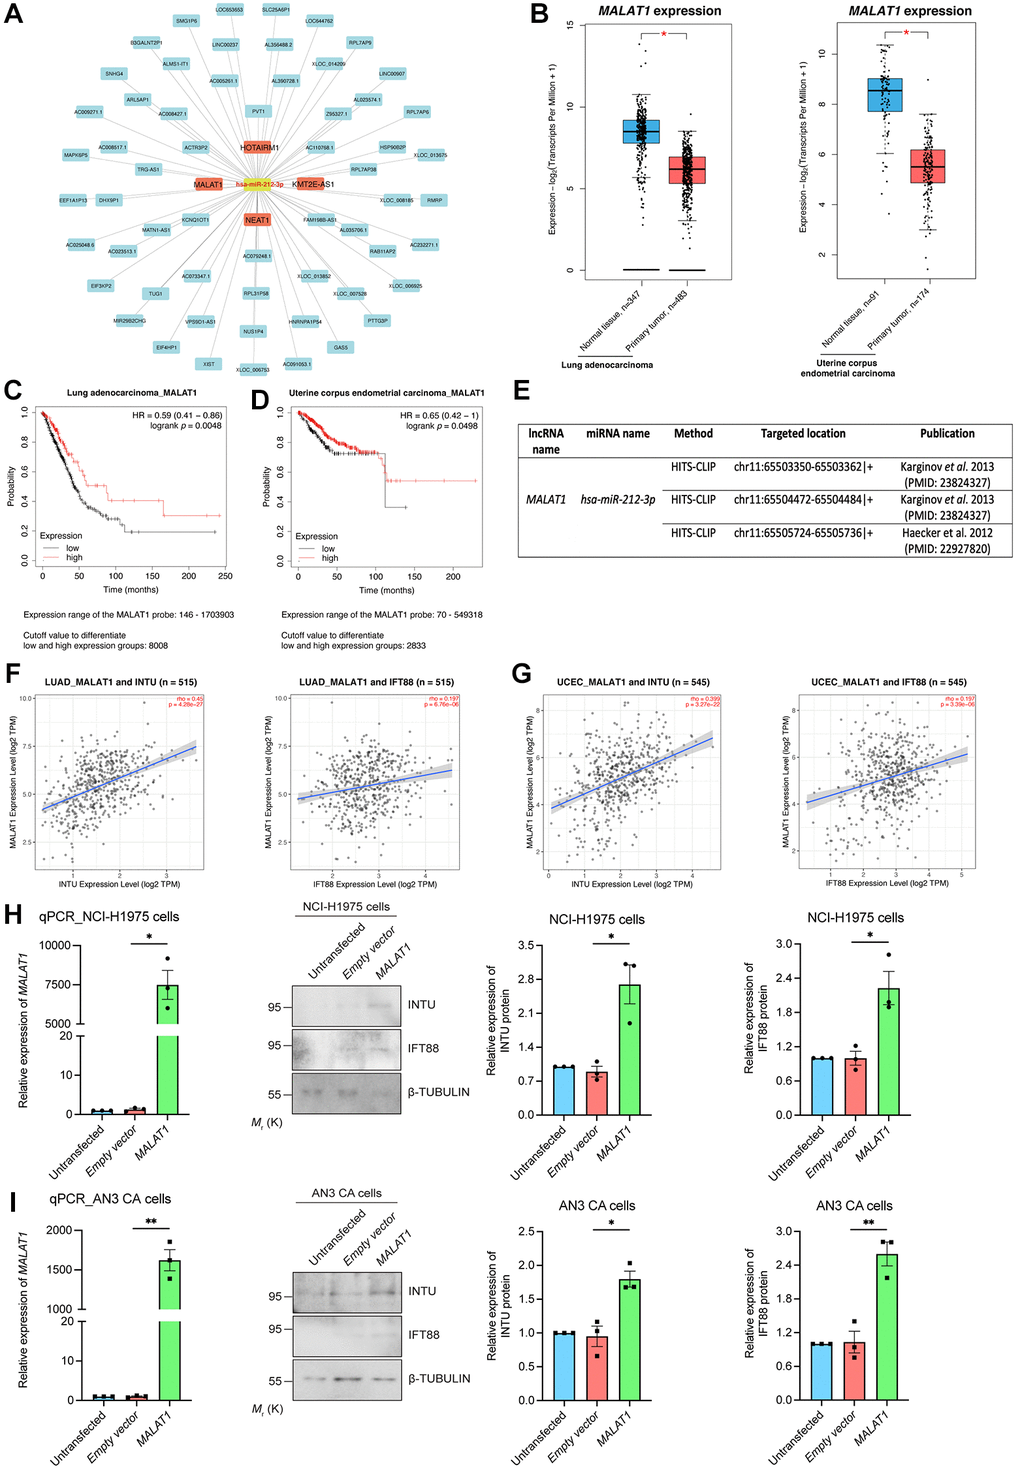 Identification of MALAT1 as a communal lncRNA mediating INTU and IFT88 expression in LUAD and UCEC samples. (A) Identification of the lncRNAs against hsa-miR-212-3p and construction of the lncRNA-miRNA regulatory network. (B) The expression of MALAT1 was significantly downregulated in LUAD and UCEC tumor samples. (C, D) Decreased level of MALAT1 was found associated with poor prognosis in LUAD (C) and UCEC (D) patients. (E) The MALAT1 was identified as targeted lncRNA against hsa-miR-212-3p from two independent studies. (F, G) The expression of MALAT1 positively associated with the expression of INTU and IFT88 in LUAD (F) and UCEC (G) tumor samples. (H, I) Overexpression of MALAT1 caused the upregulation of INTU and IFT88 protein levels in NCI-H1975 (H) and AN3 CA (I) cells. n = 3 biological replicates. Each n represents an independent preparation of RNA and protein samples. Error bars represent S.E.M. Statistical analysis was performed using two-tailed unpaired Student’s t-test. * denotes p 